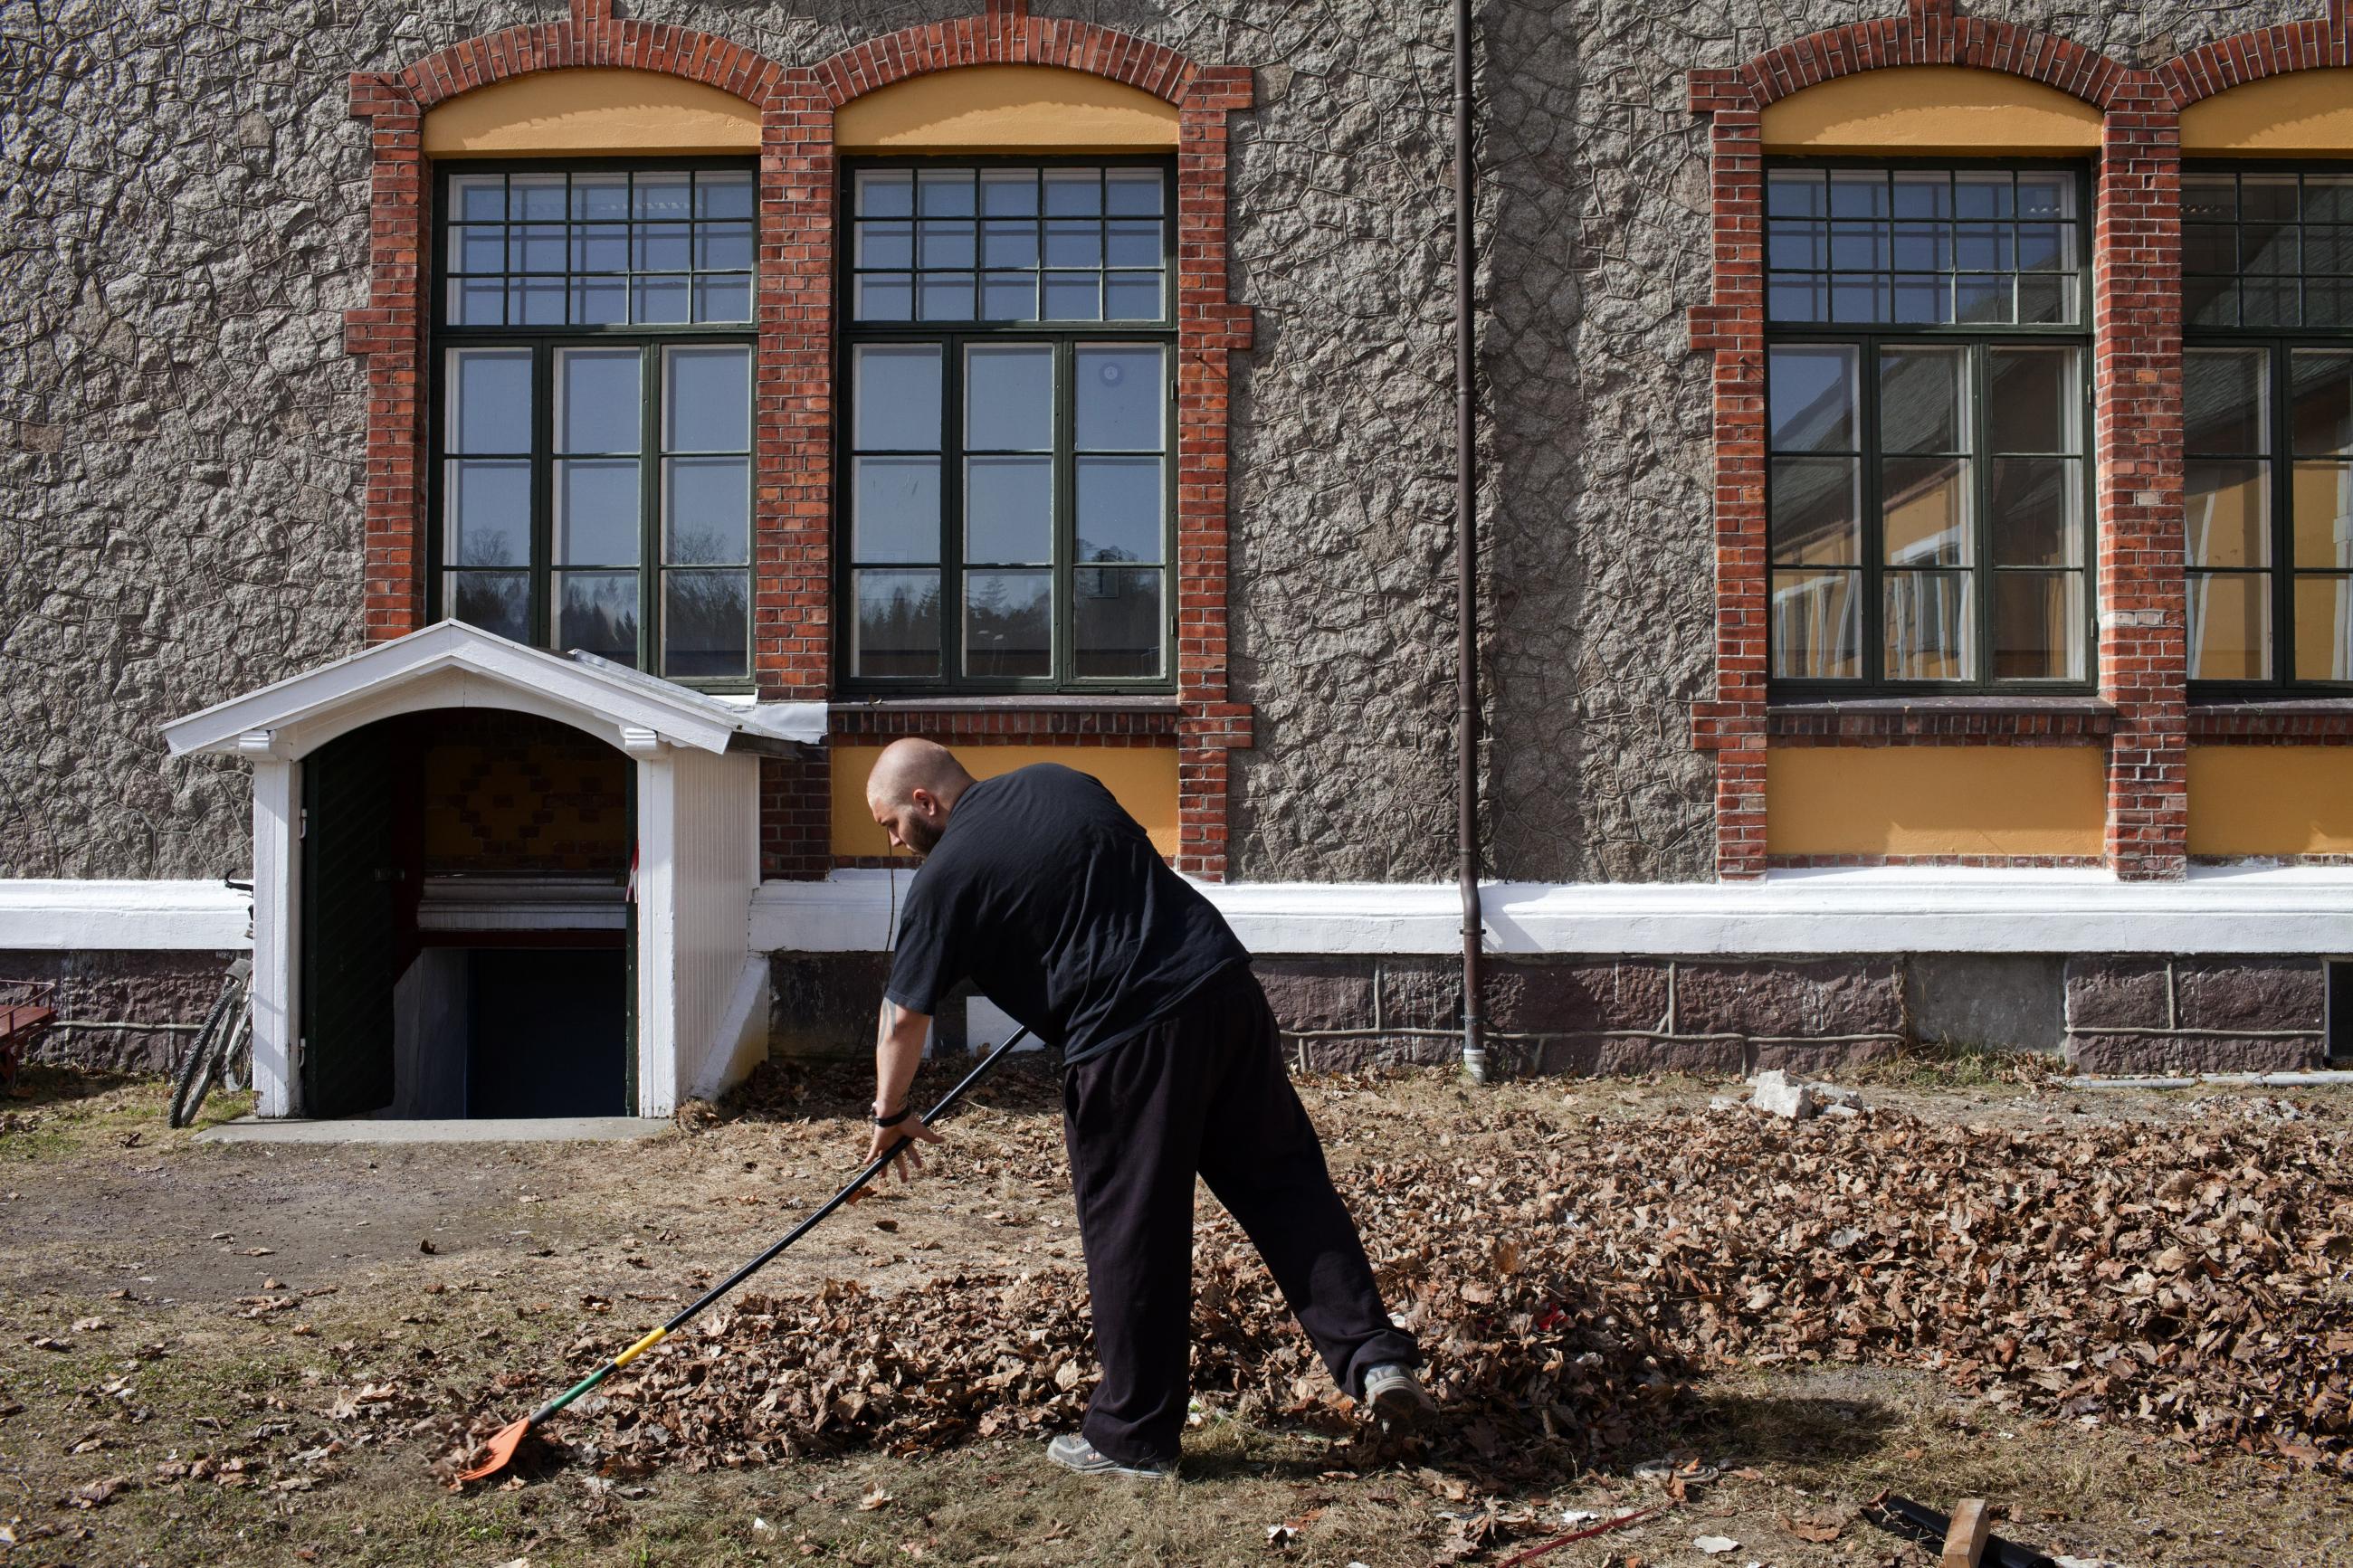 An inmate sentenced to ten months rakes leaves in Bastoy Prison in Horten, Norway on April 11, 2011. 